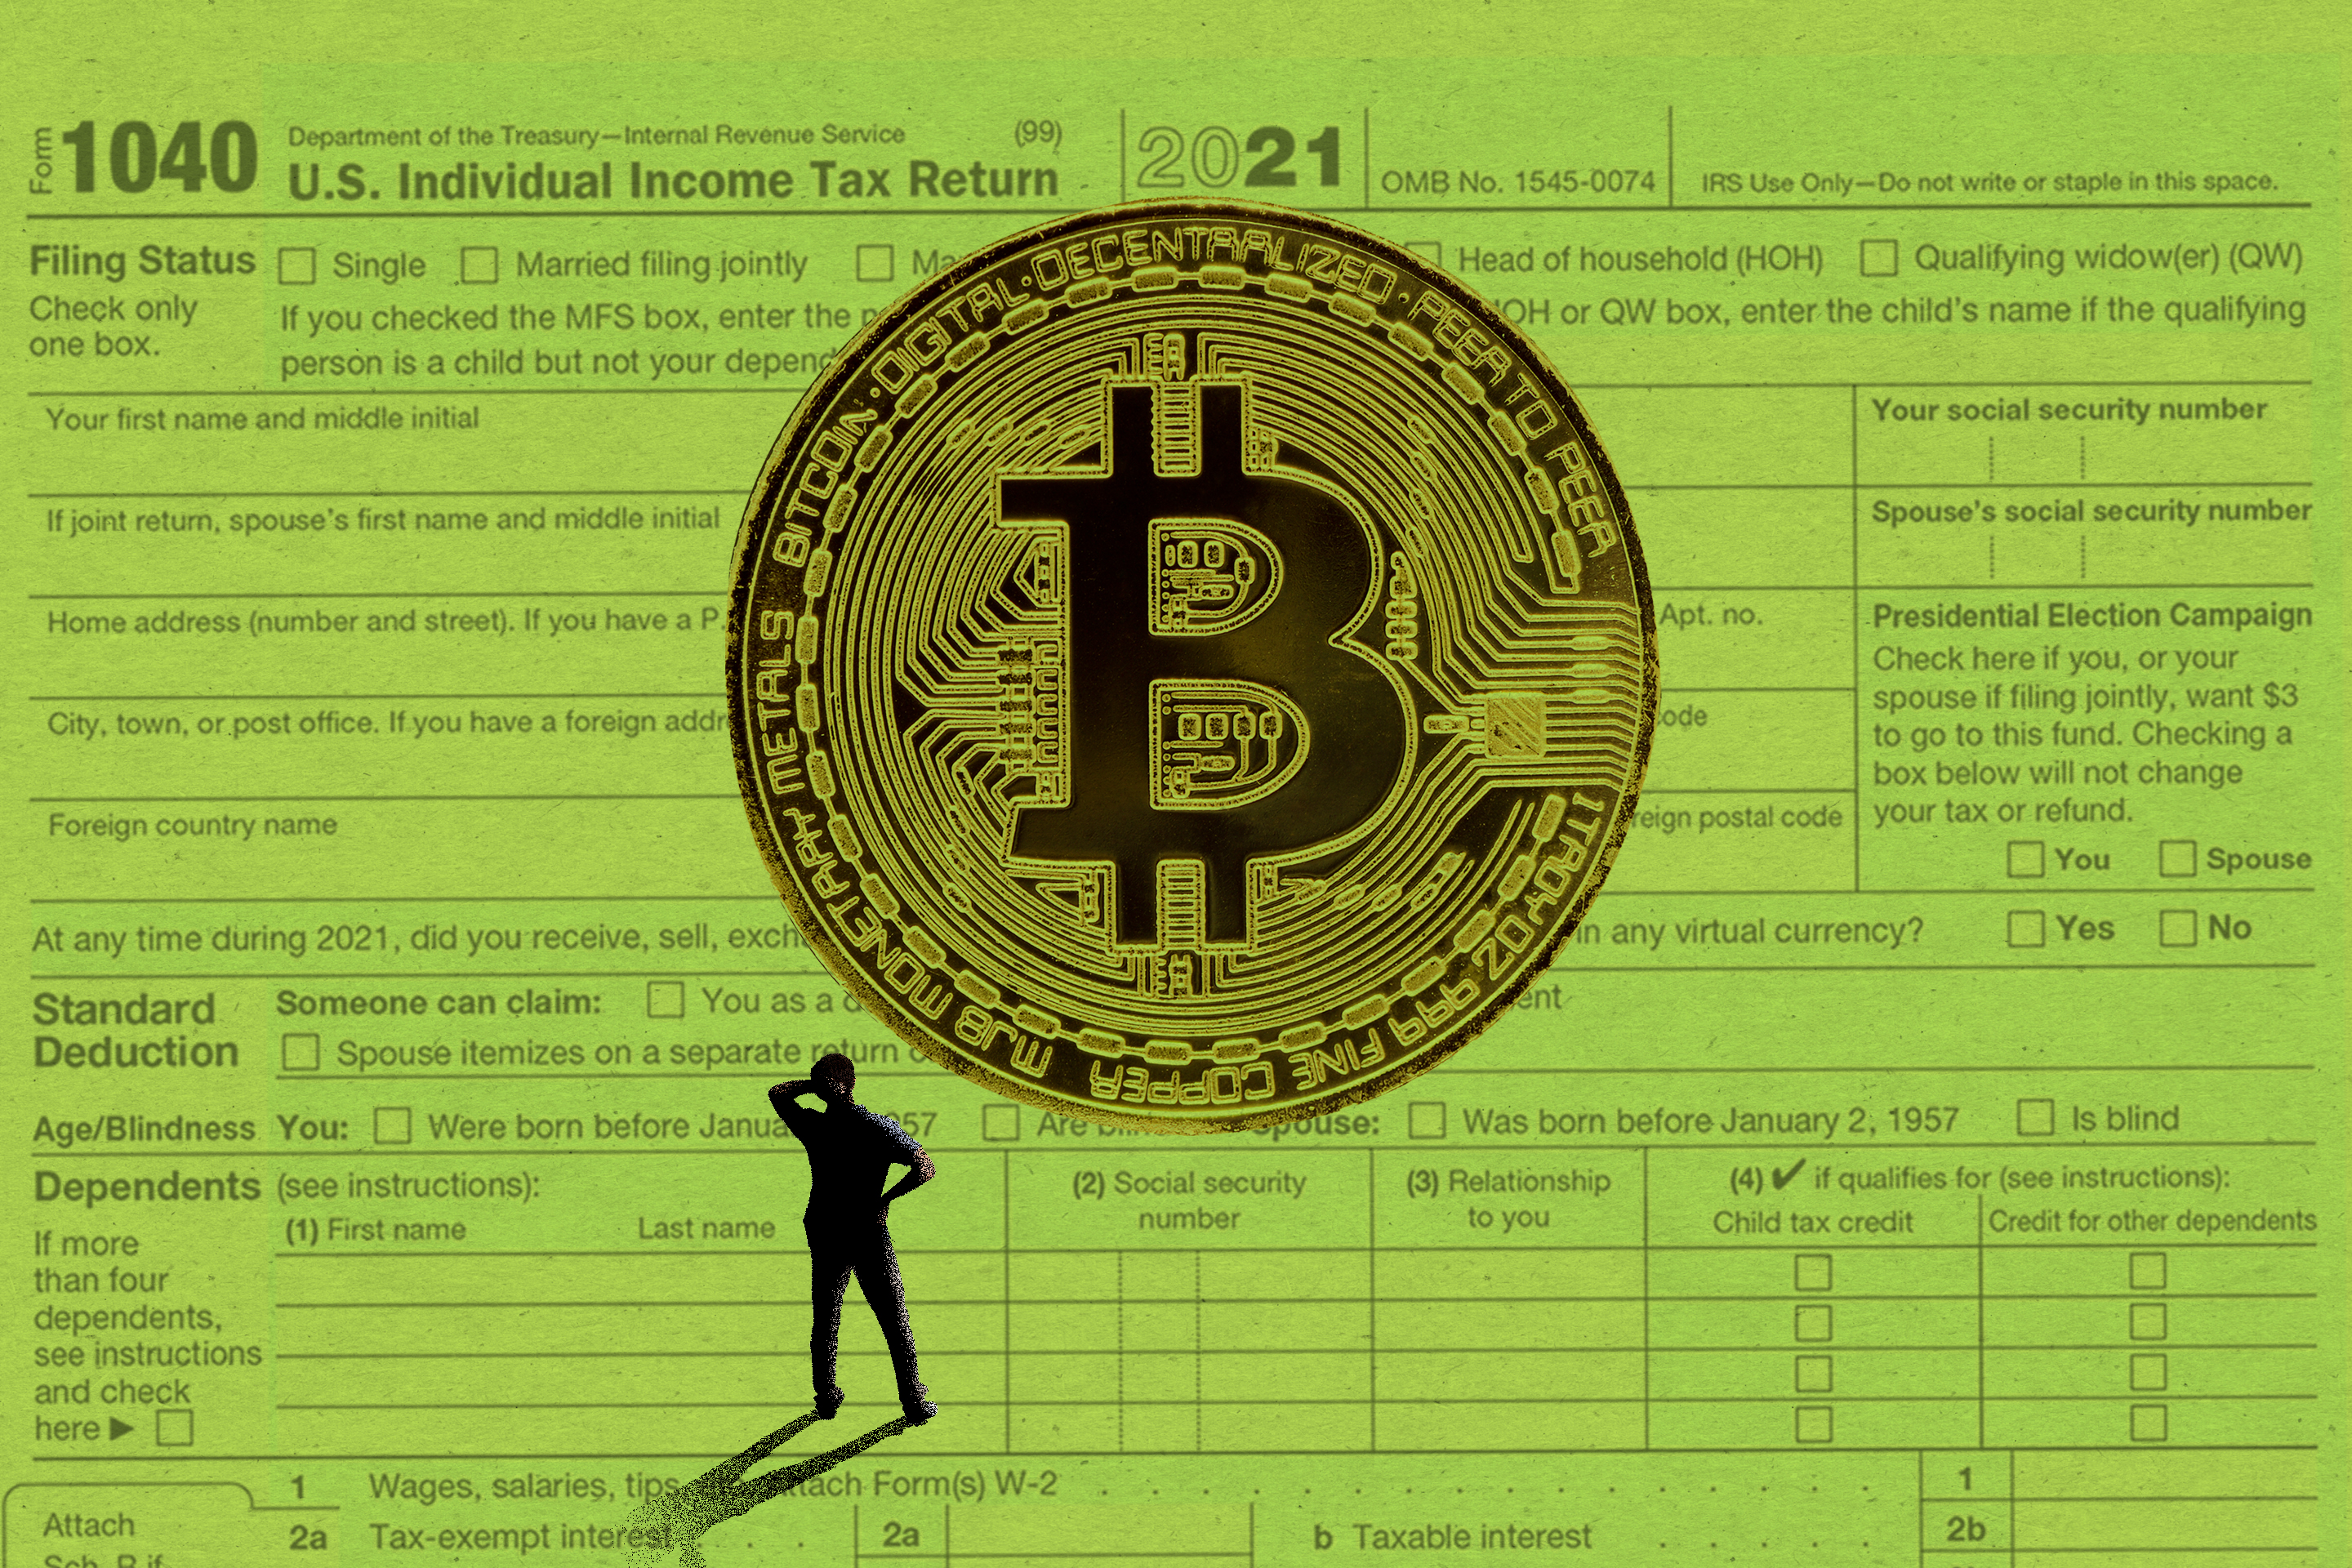 'You’re Likely to Get Caught': What Crypto Investors Should Know While Filing Taxes This Year